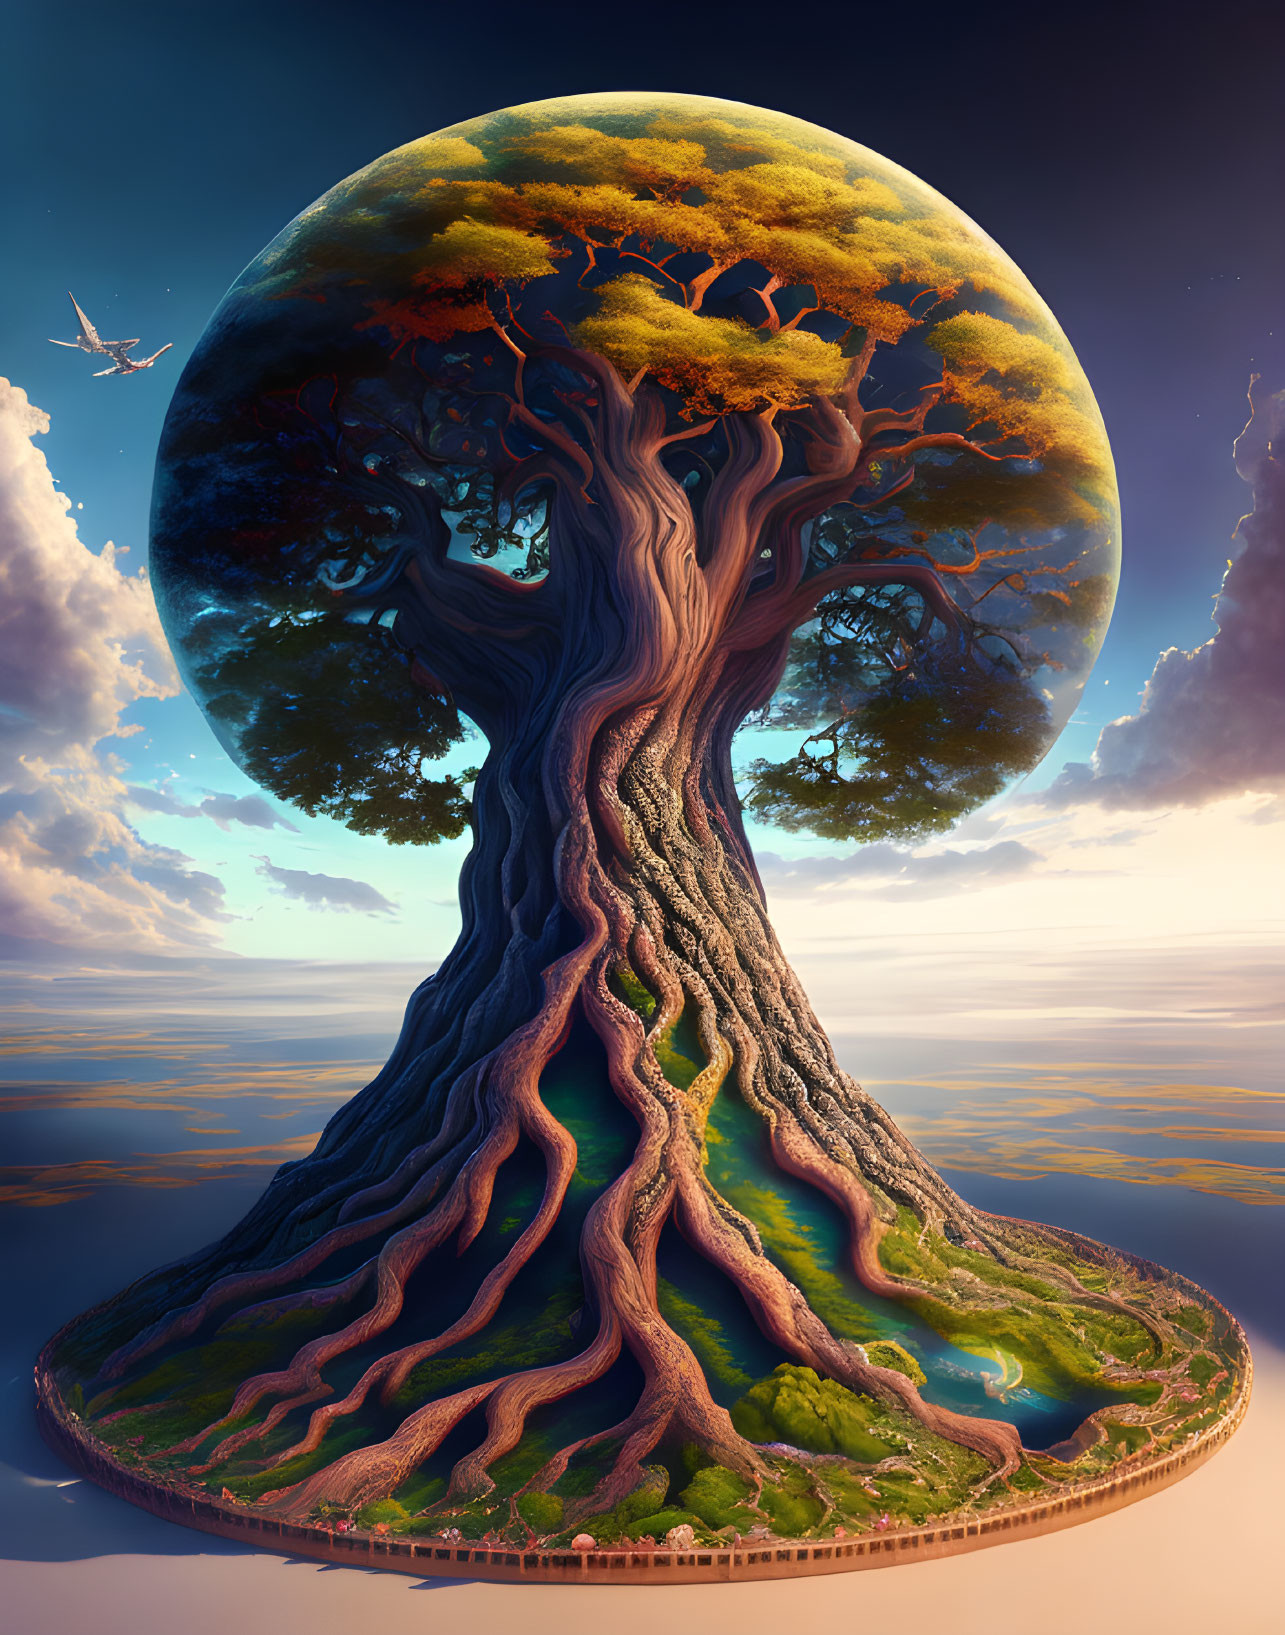 Majestic tree with sprawling roots and vibrant foliage on circular landmass under moonlit sky